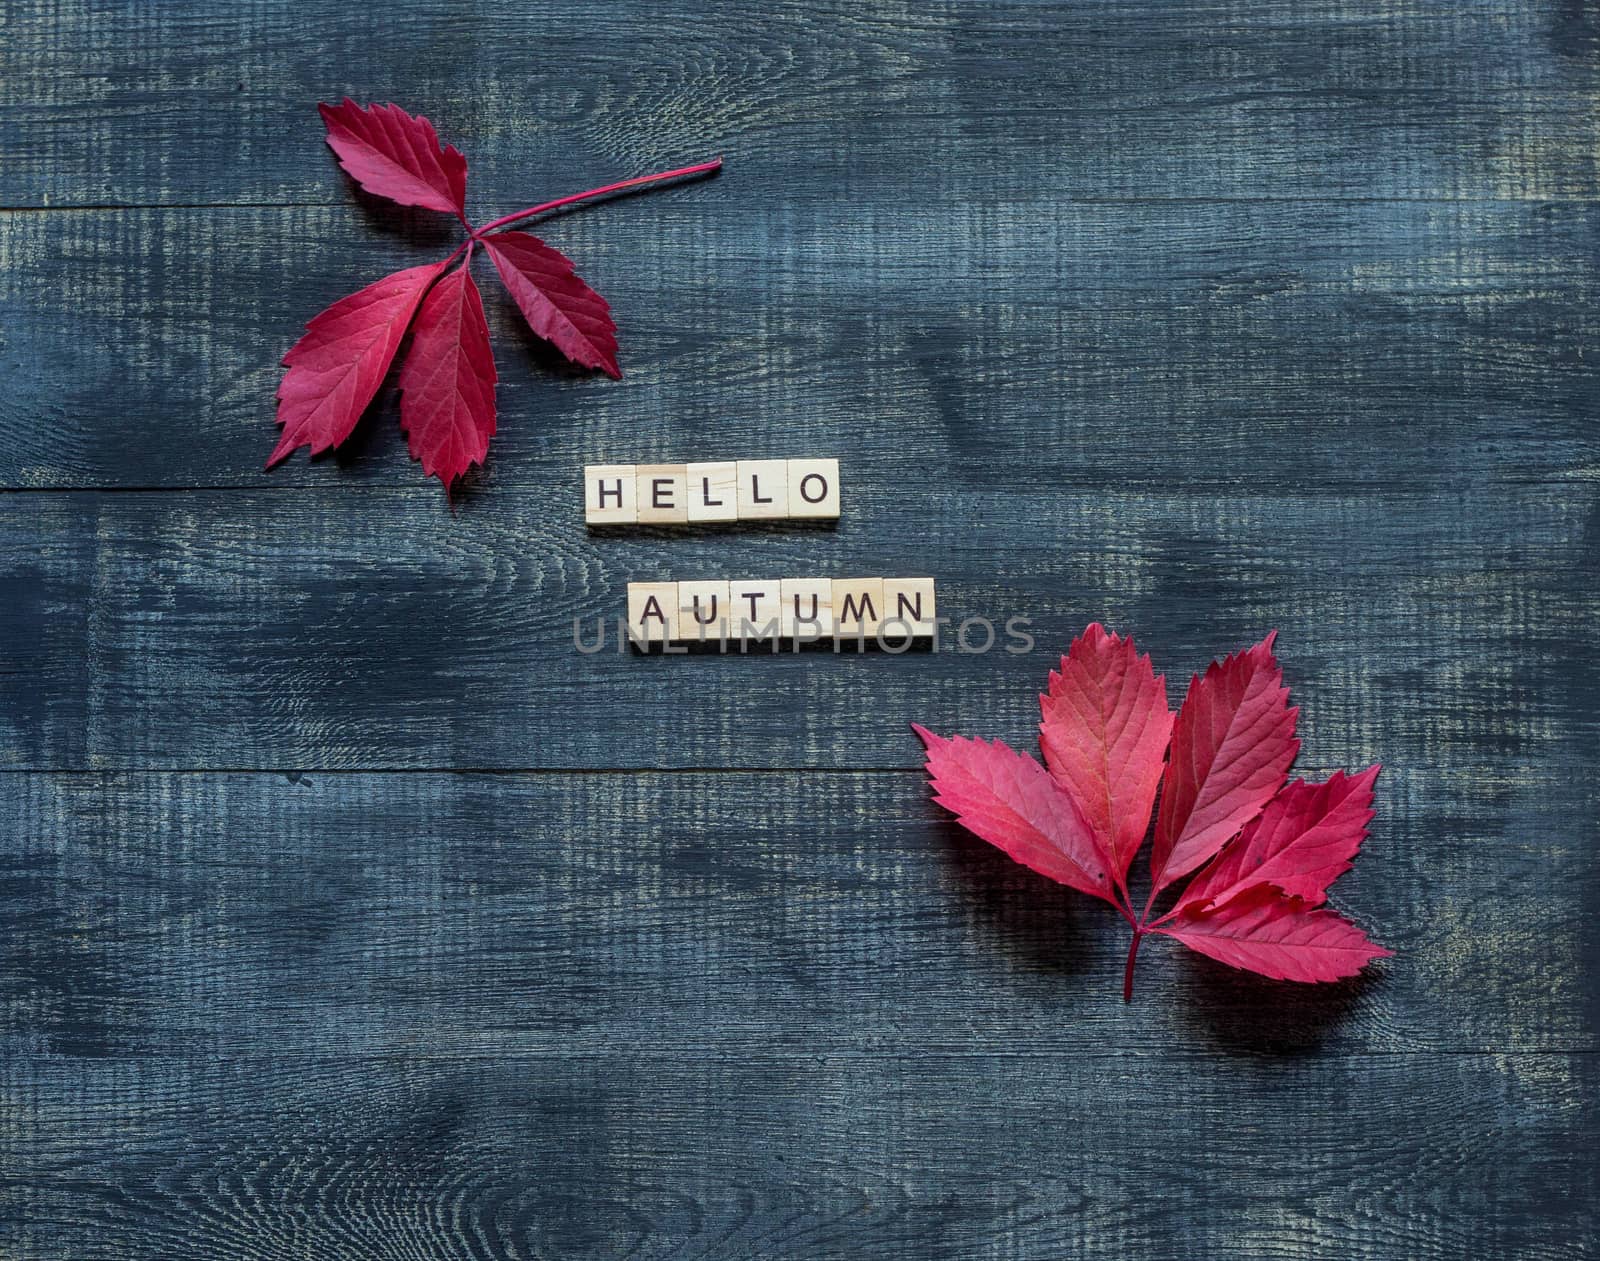 Text hello autumn framed by autumn fallen leaves on a dark wooden background.